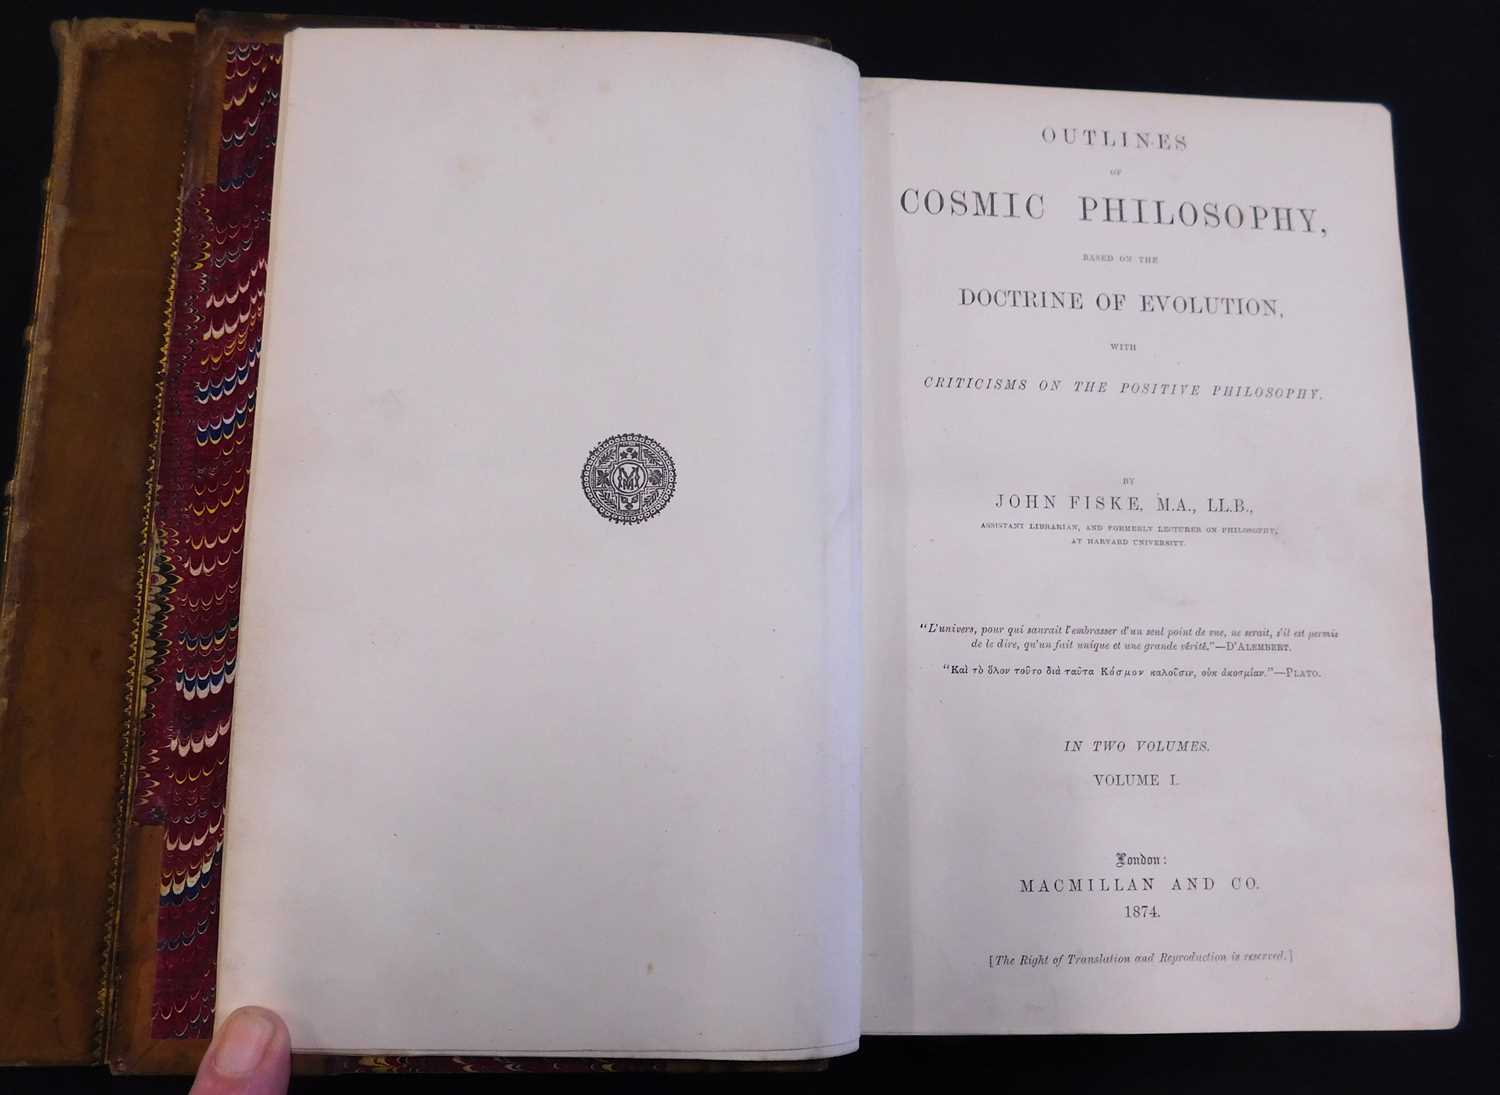 JOHN FISKE: OUTLINES OF COSMIC PHILOSOPHY BASED ON THE DOCTRINE OF EVOLUTION WITH CRITICISMS ON